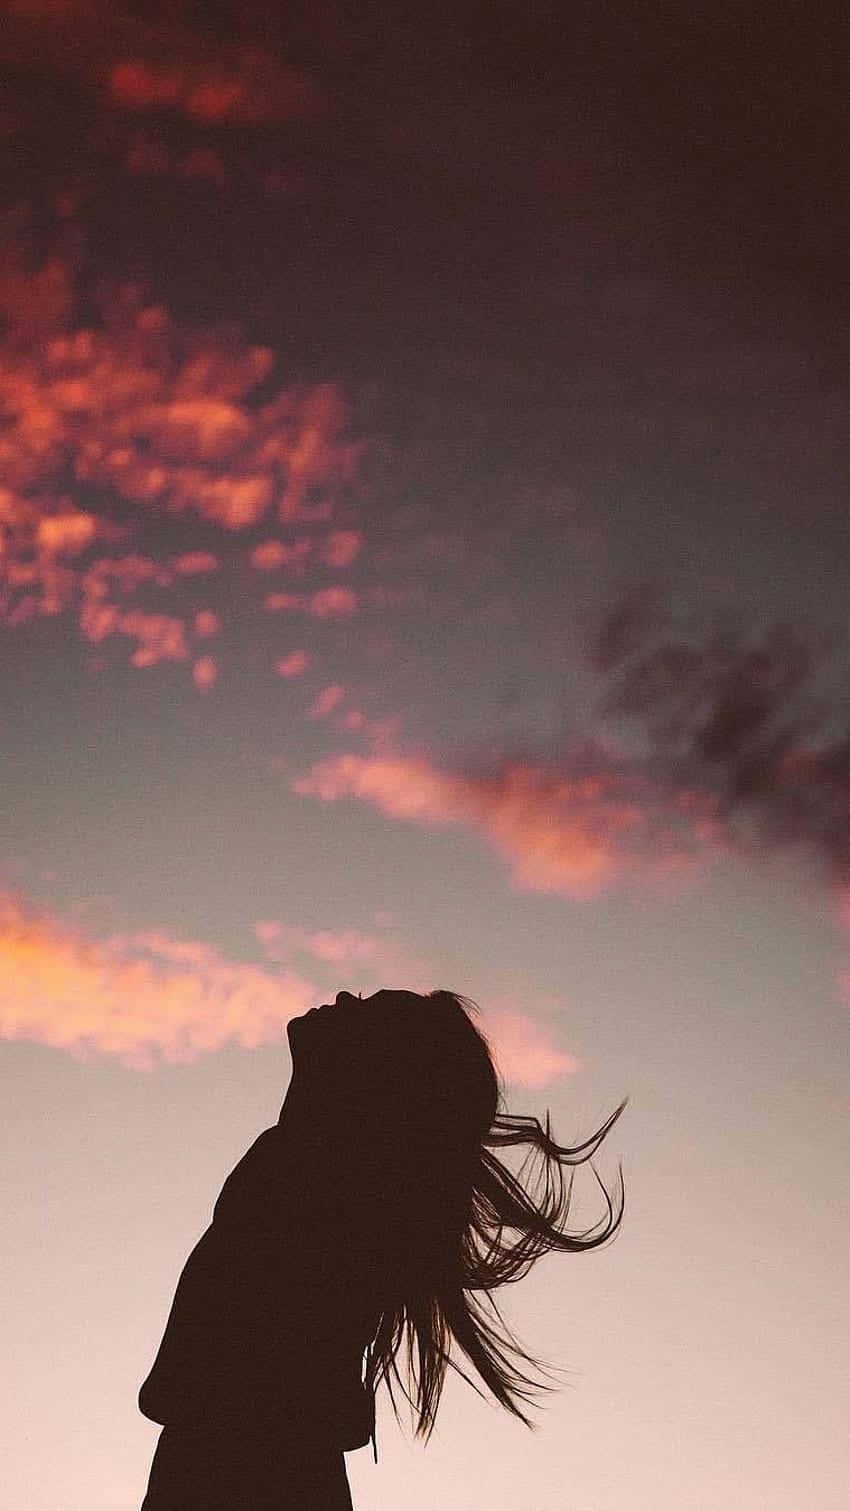 Download Silhouette Of A Woman With Her Hair Up In The Air | Wallpapers.com